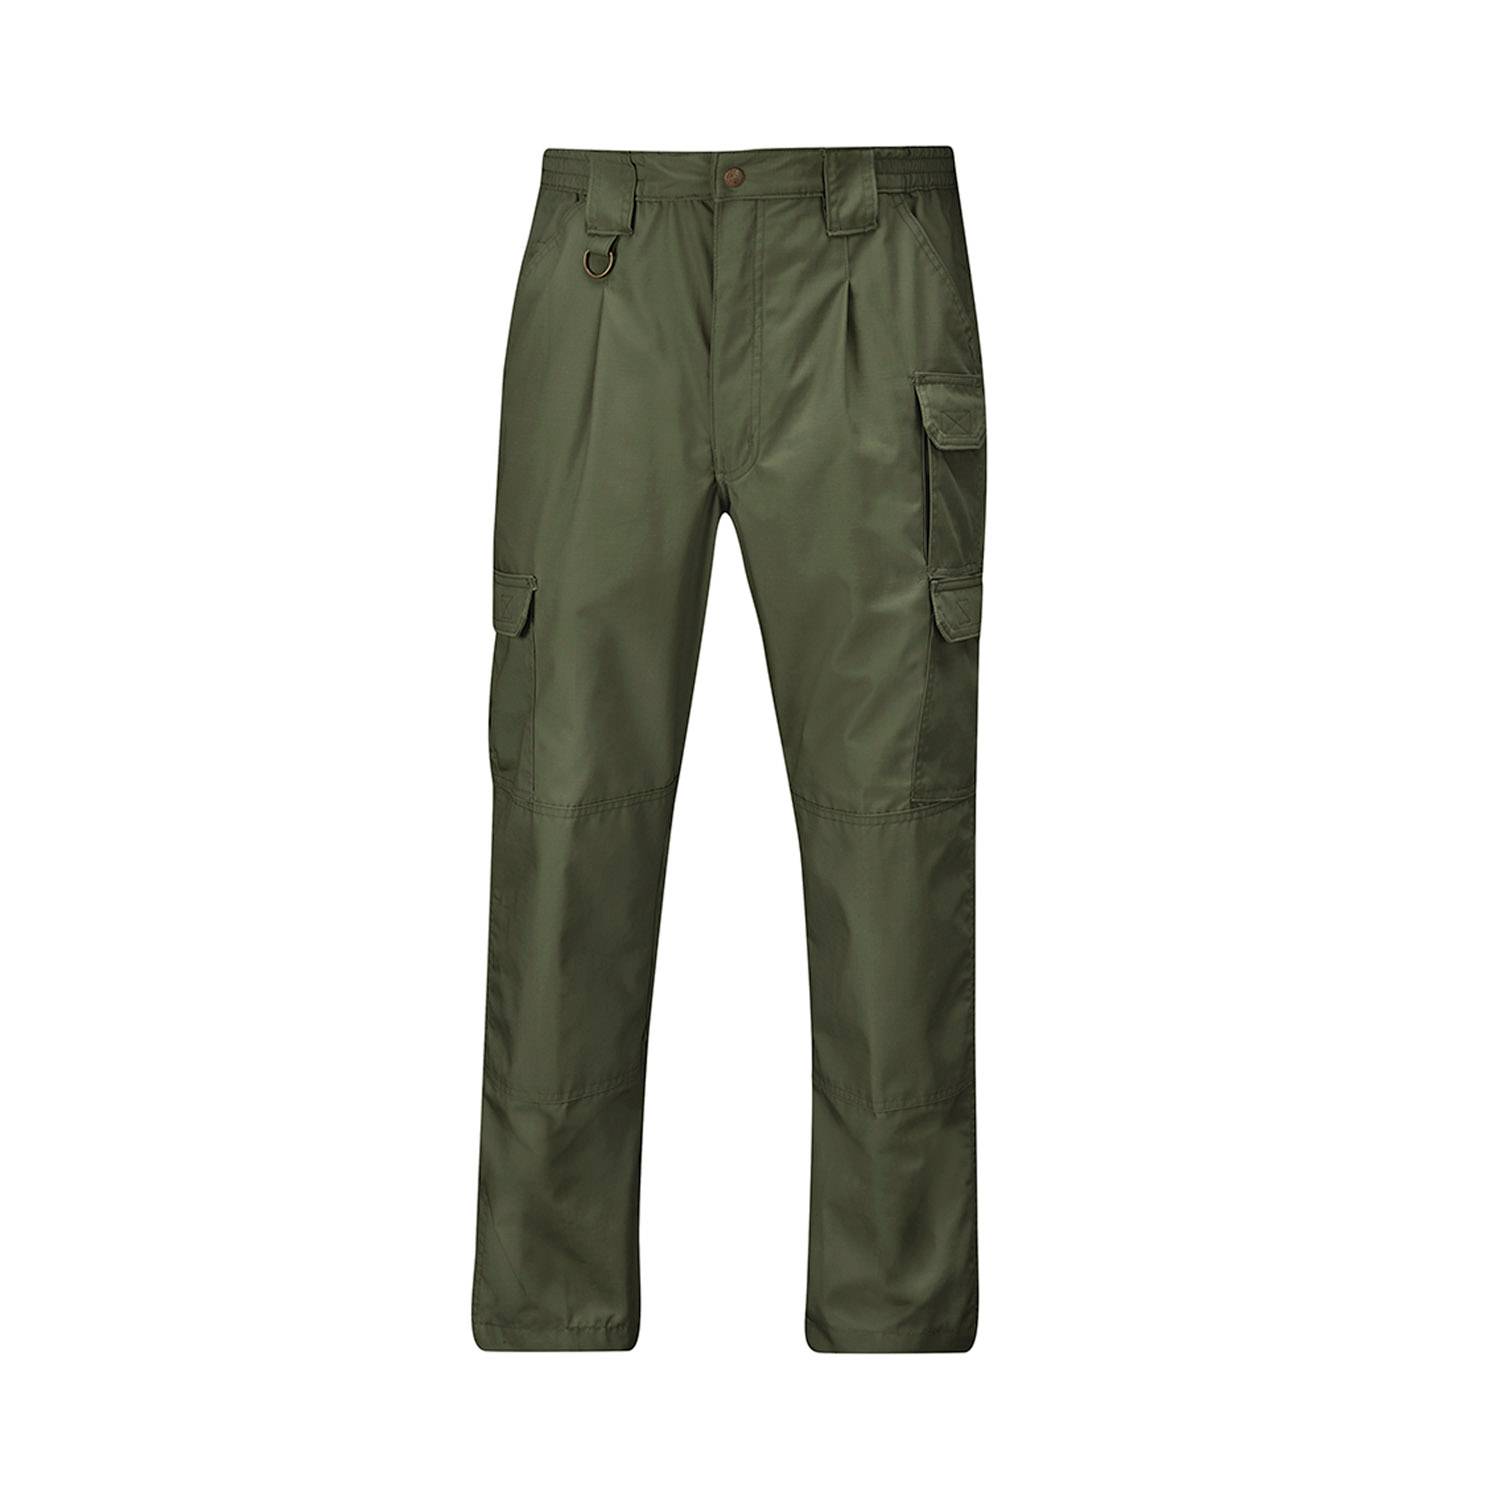 Propper Lightweight Tactical Trousers